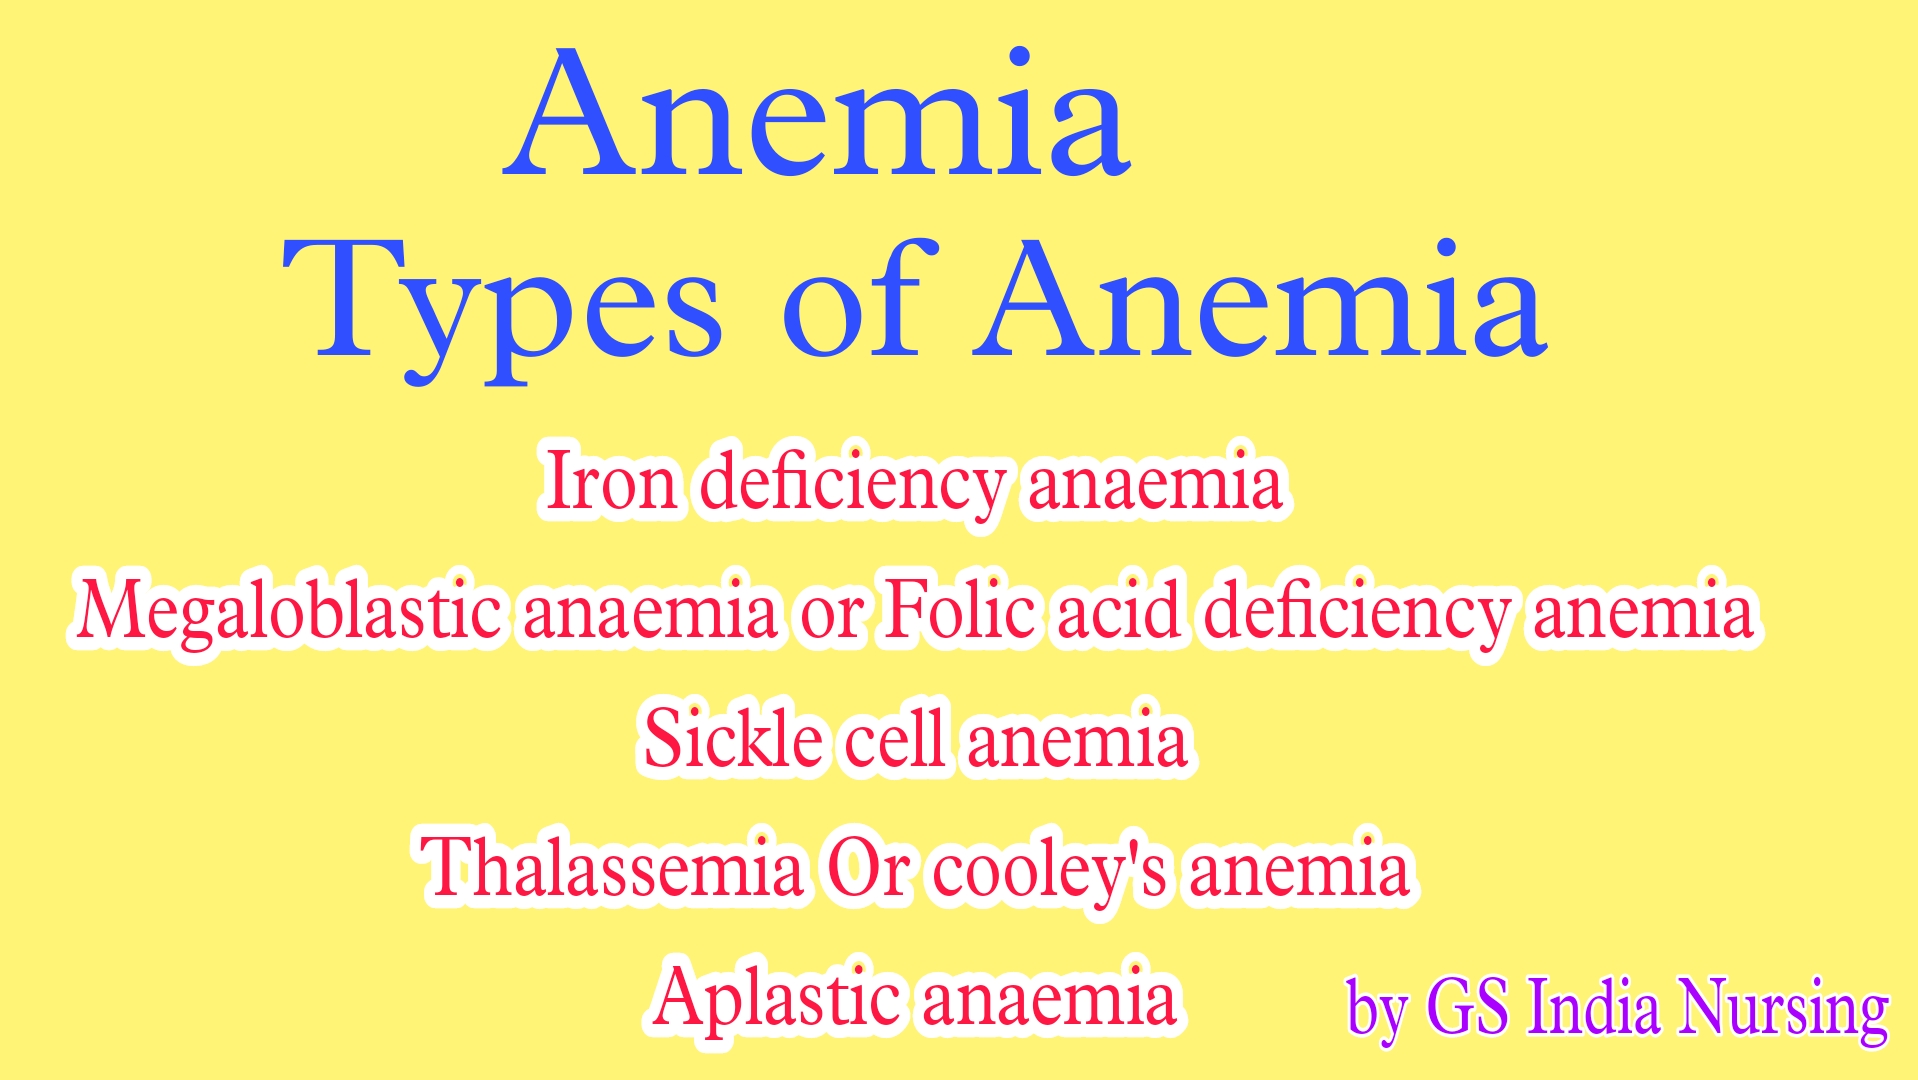 Anemia Types Of Anemia Causes And Symptoms And Their Managementtreatment — Gs India Nursing Academy 0695